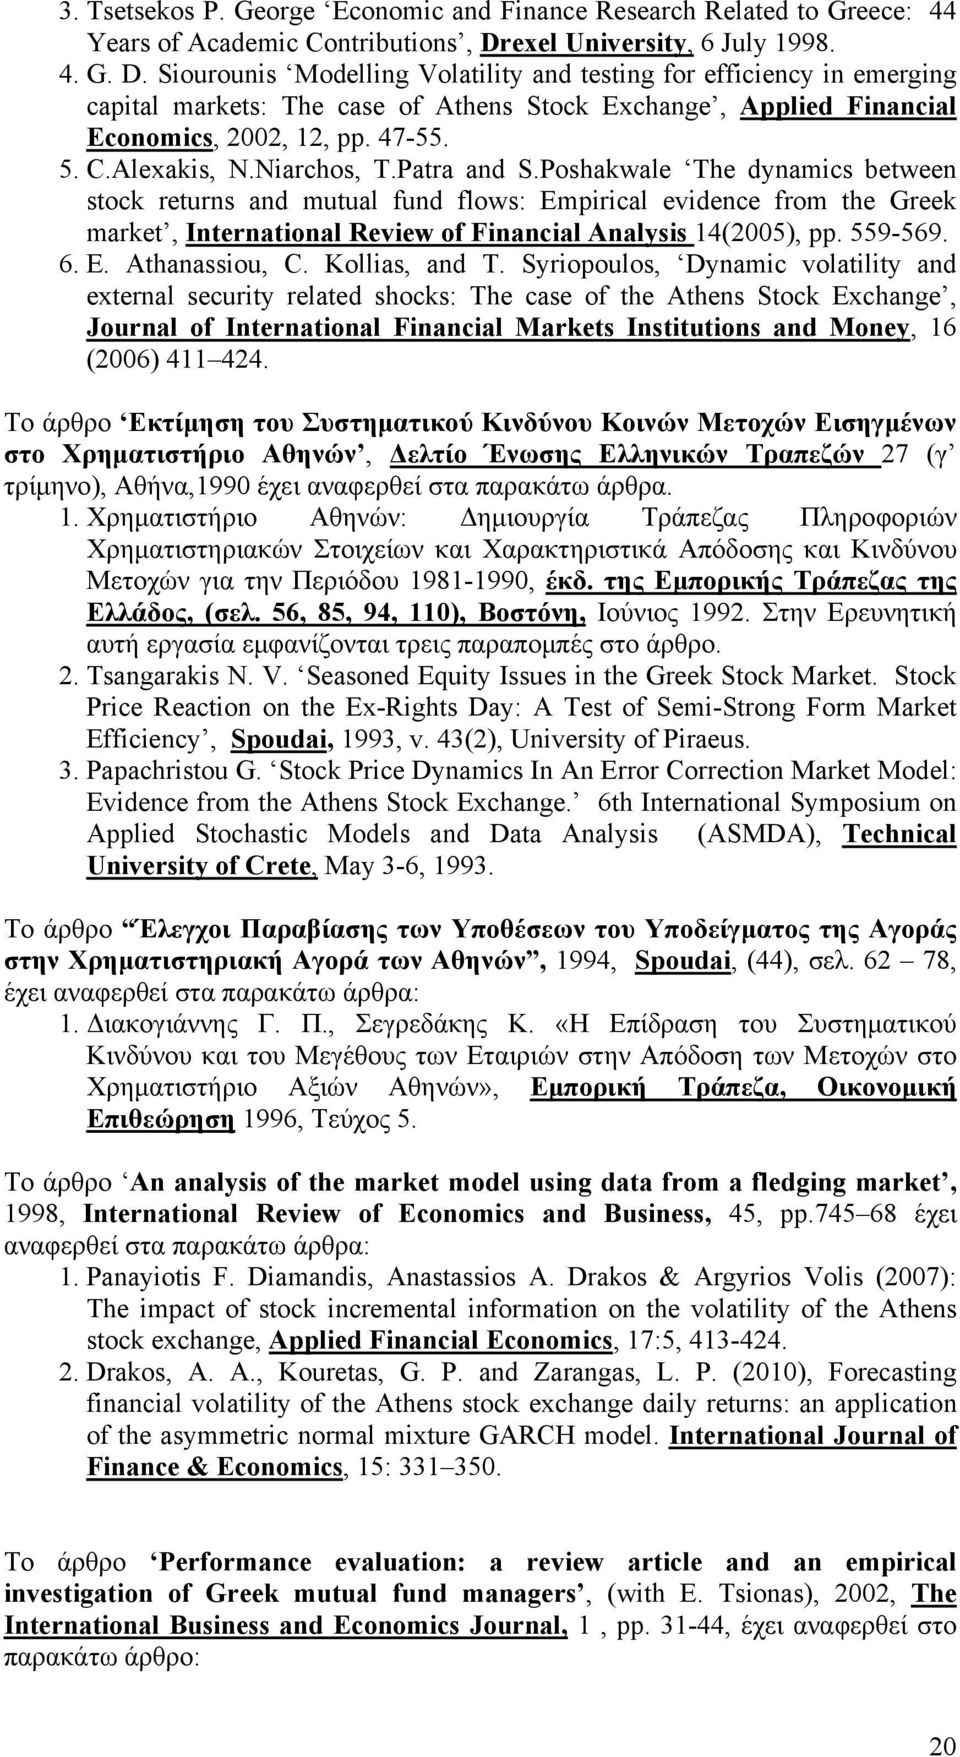 Siourounis Modelling Volatility and testing for efficiency in emerging capital markets: The case of Athens Stock Exchange, Applied Financial Economics, 2002, 12, pp. 47-55. 5. C.Alexakis, N.